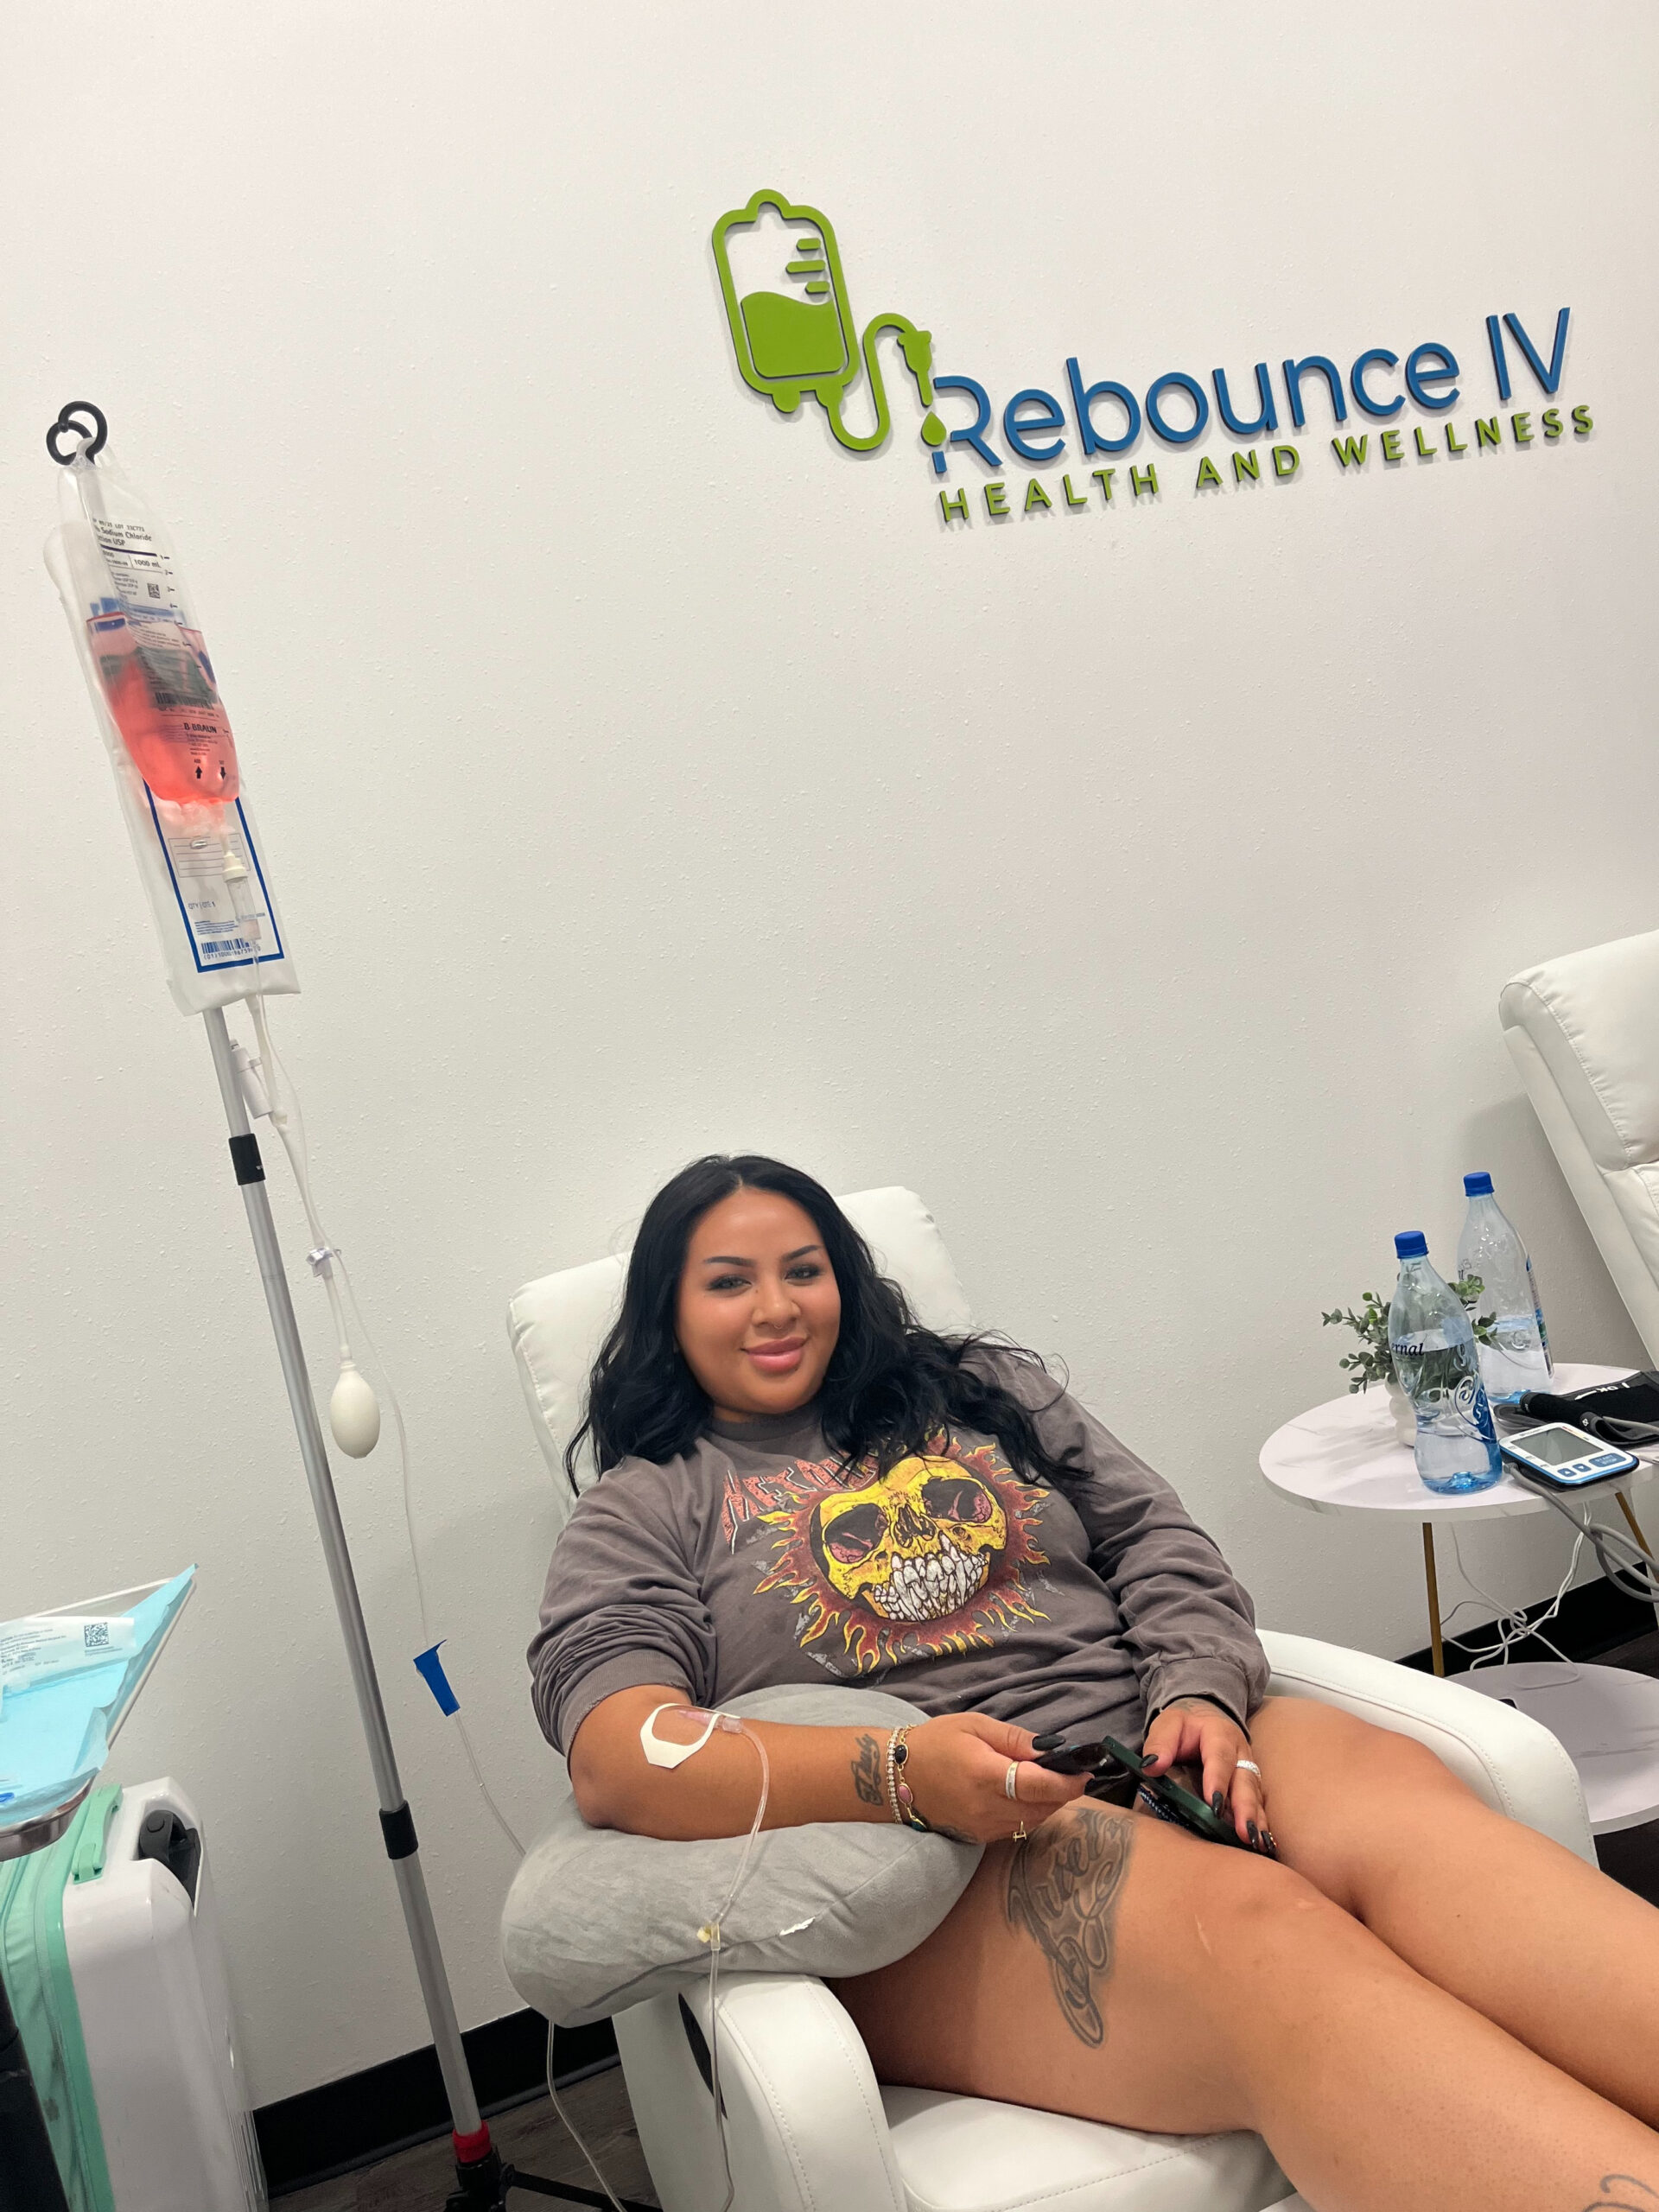 patient getting IV from rebounceiv